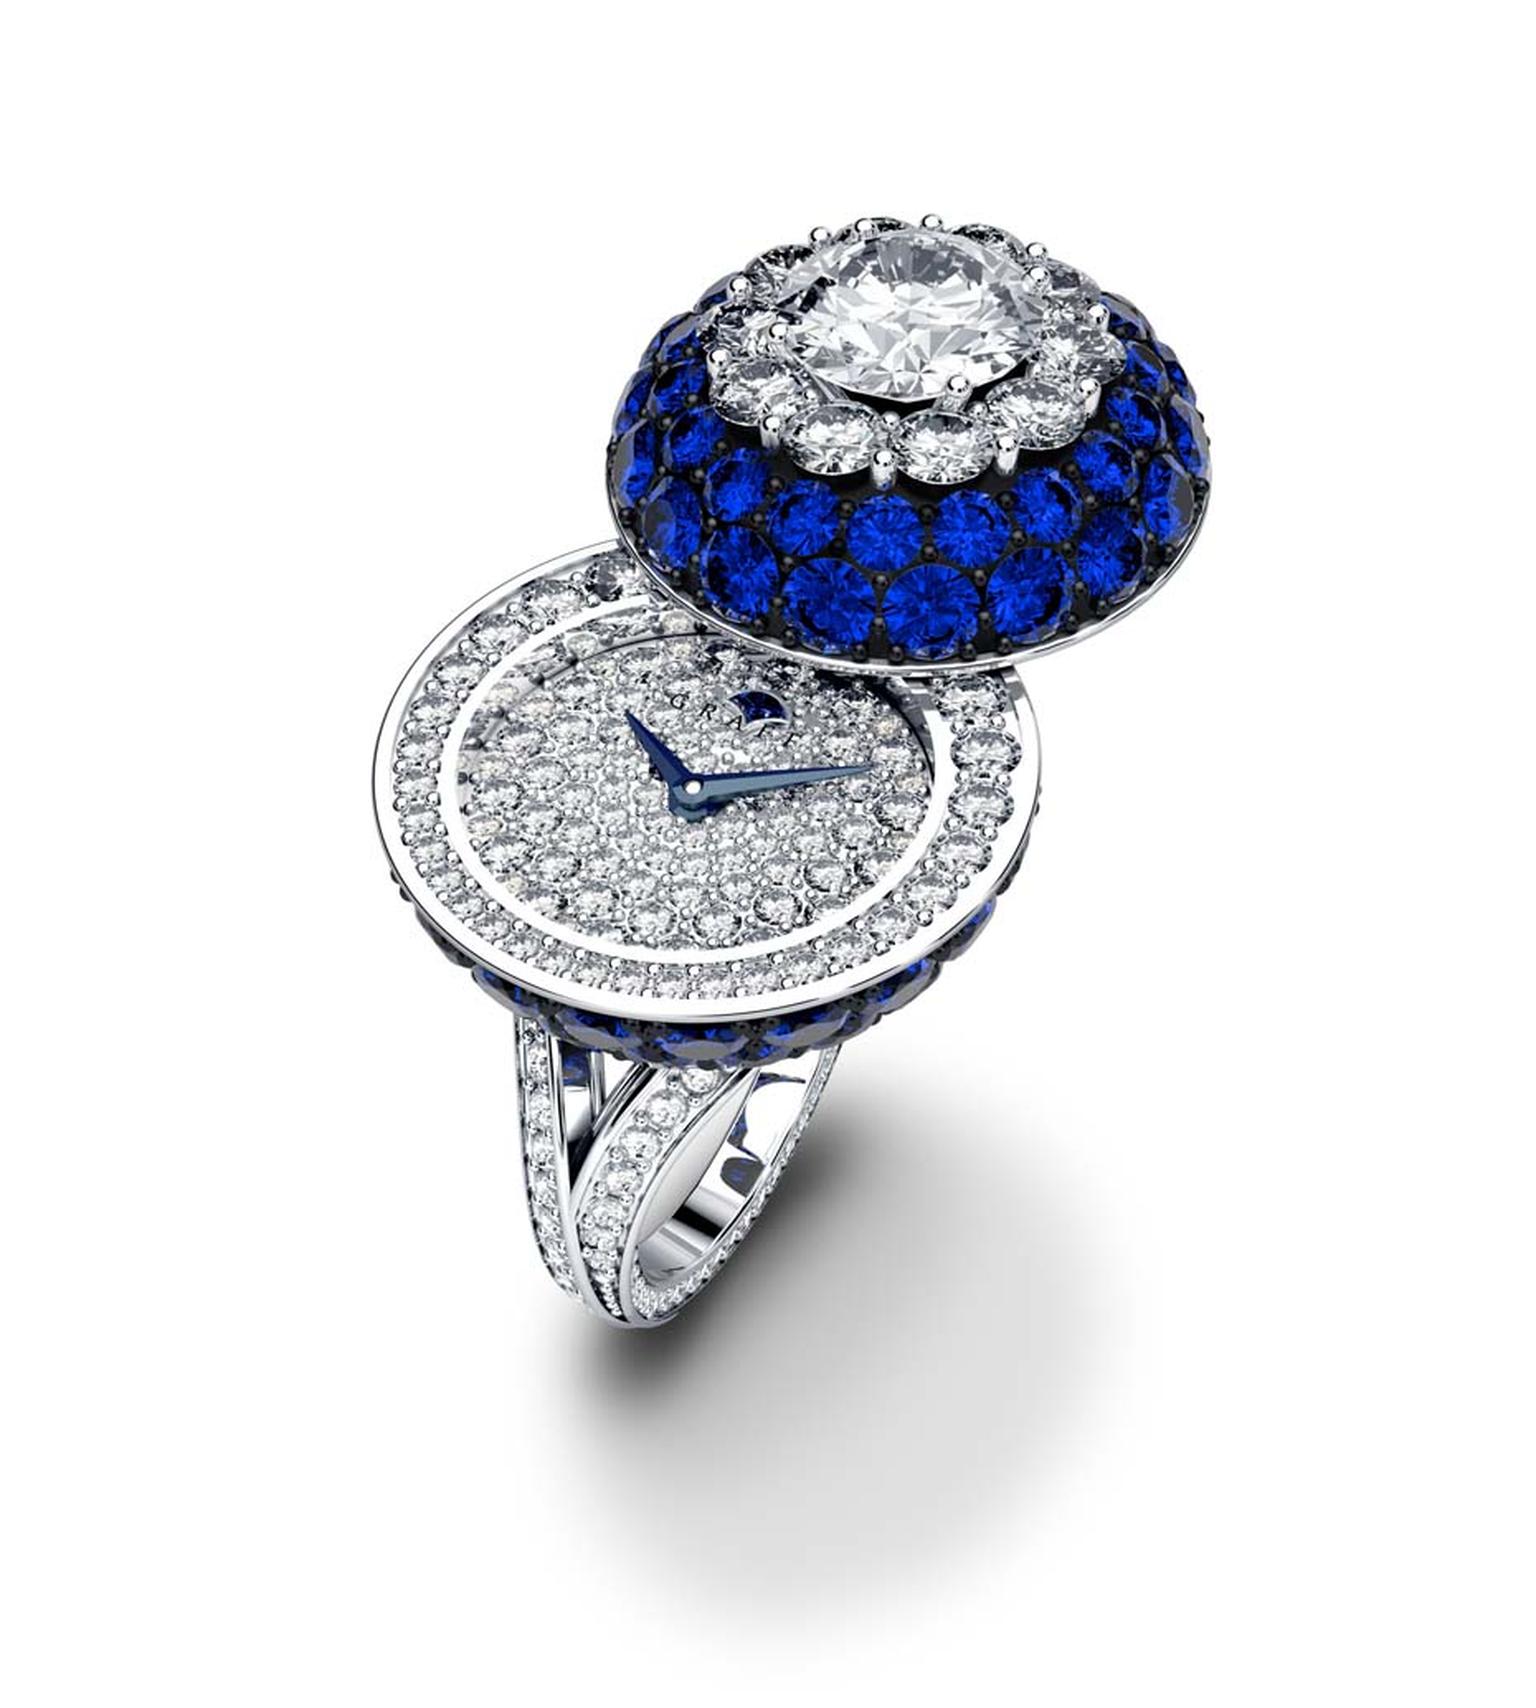 Graff Halo Secret Ring with sapphires and diamonds.